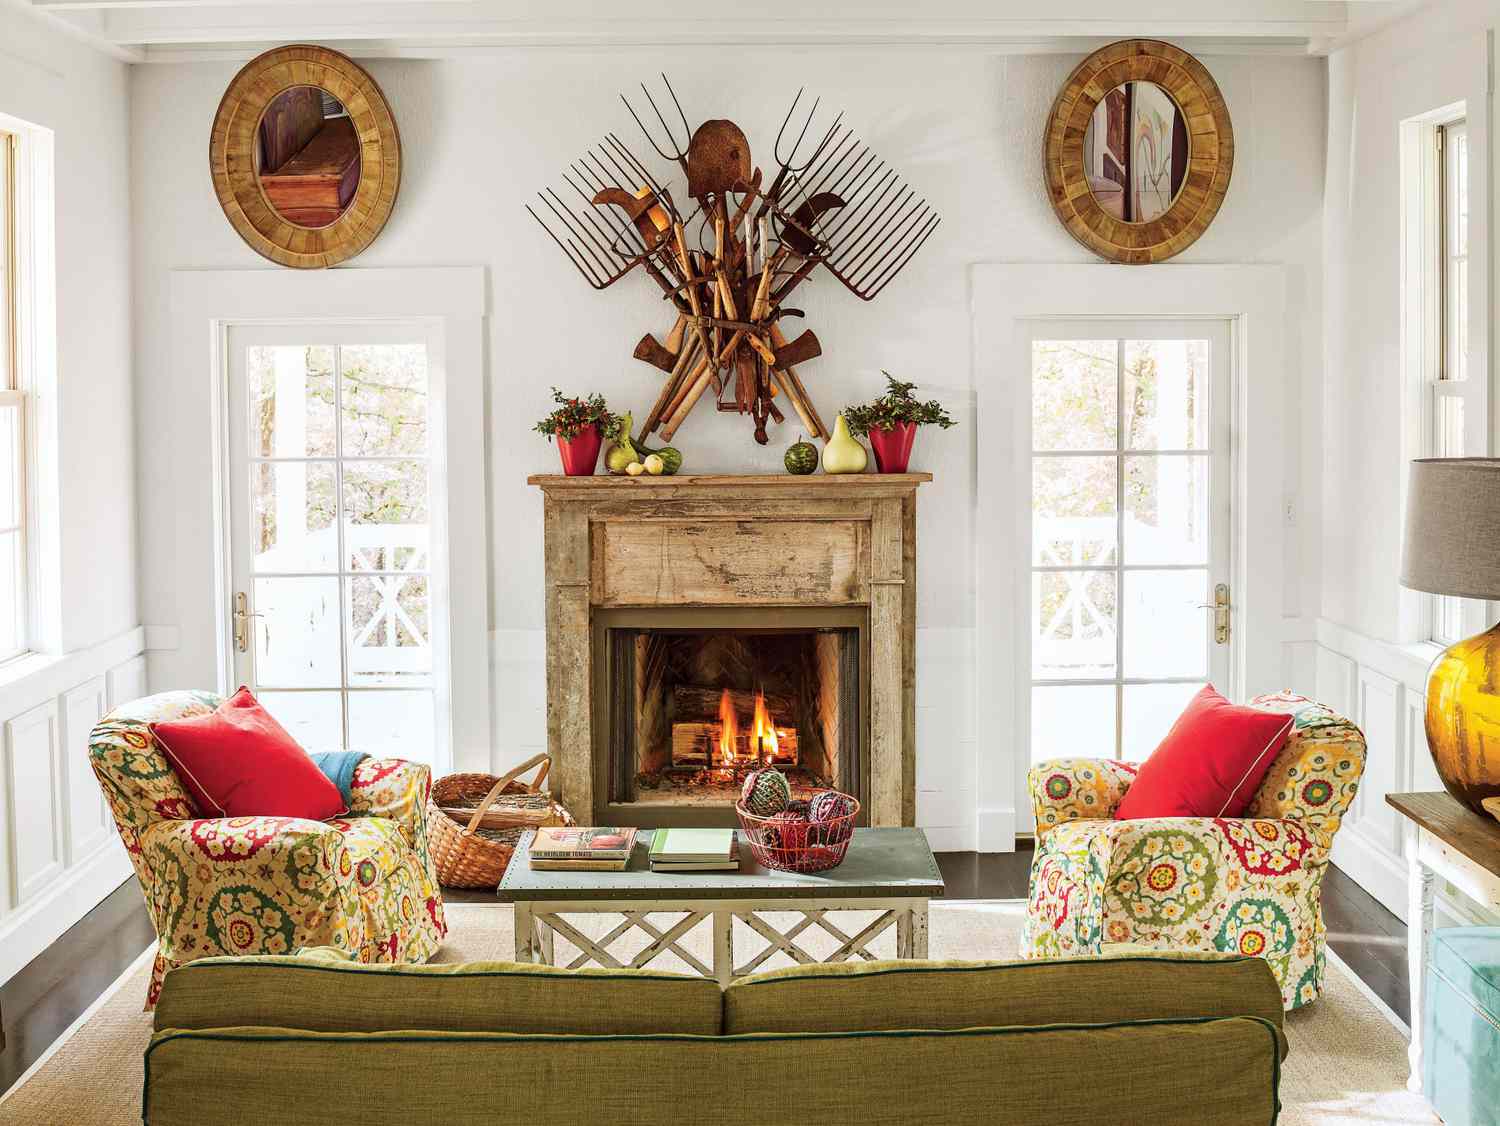 Why Should You Not Avoid Fireplace Mantel?